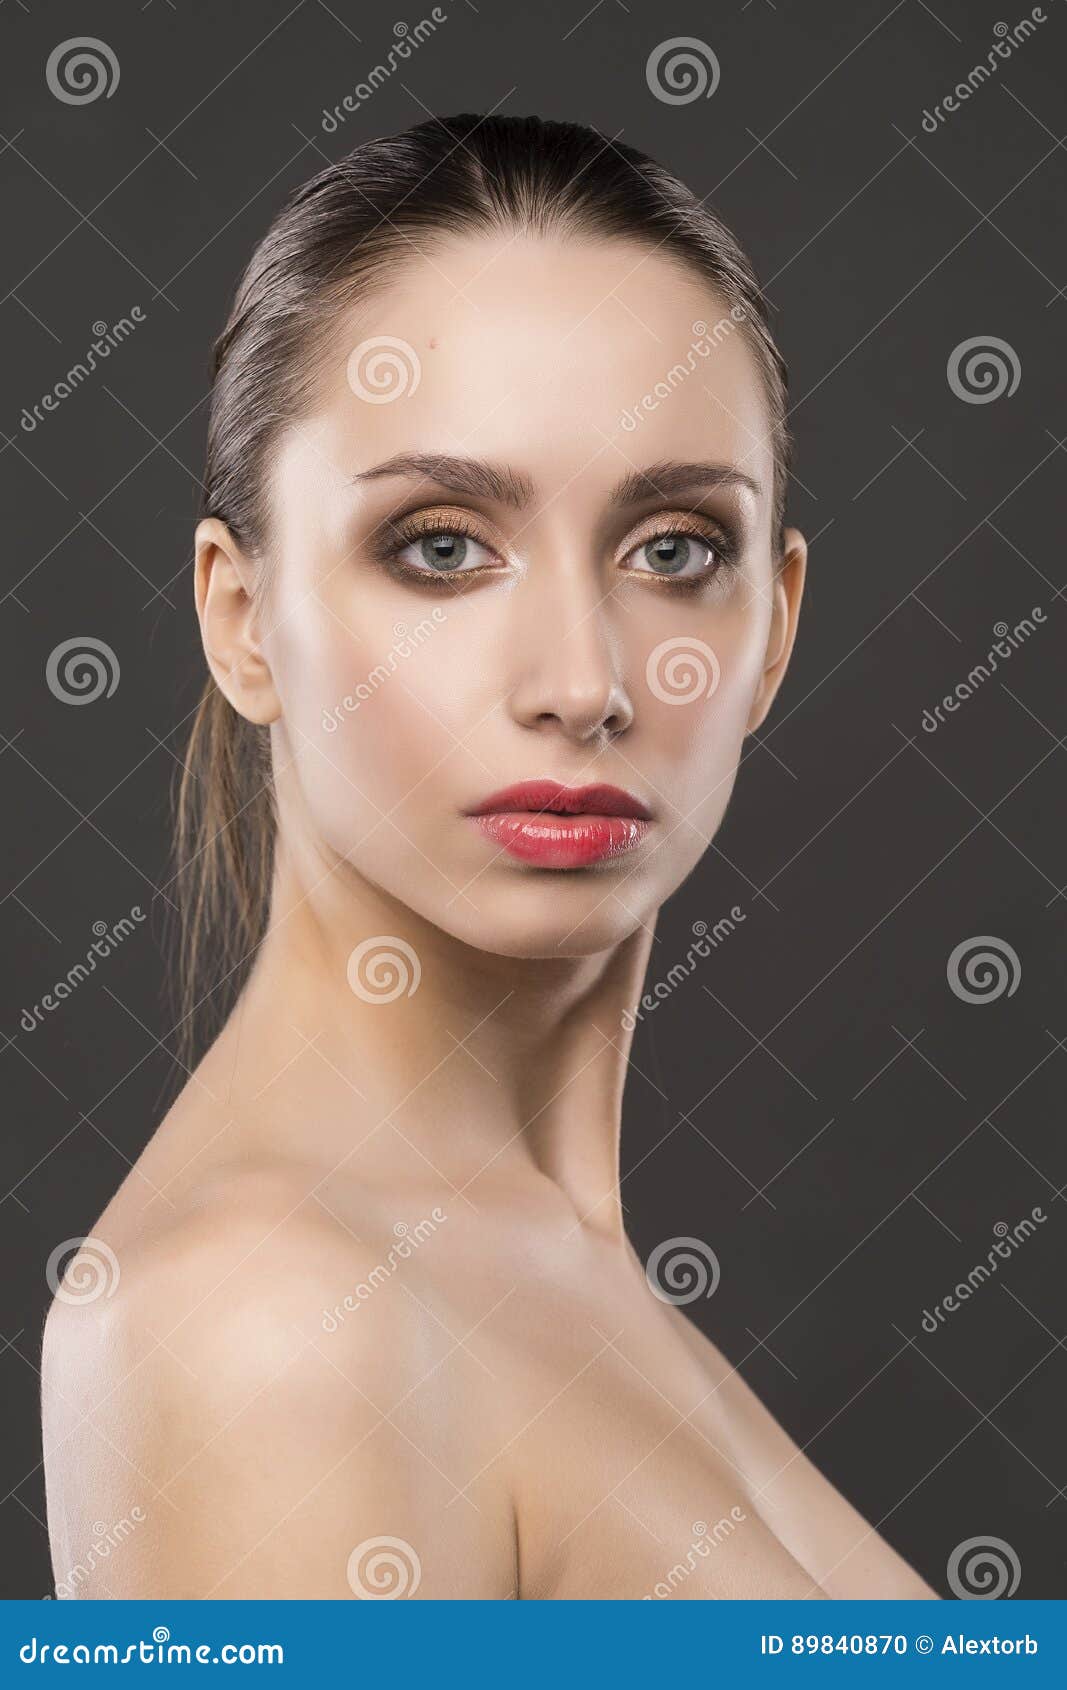 The Beautiful Girl Naked Shoulders Portrait On A Gray Background Stock 